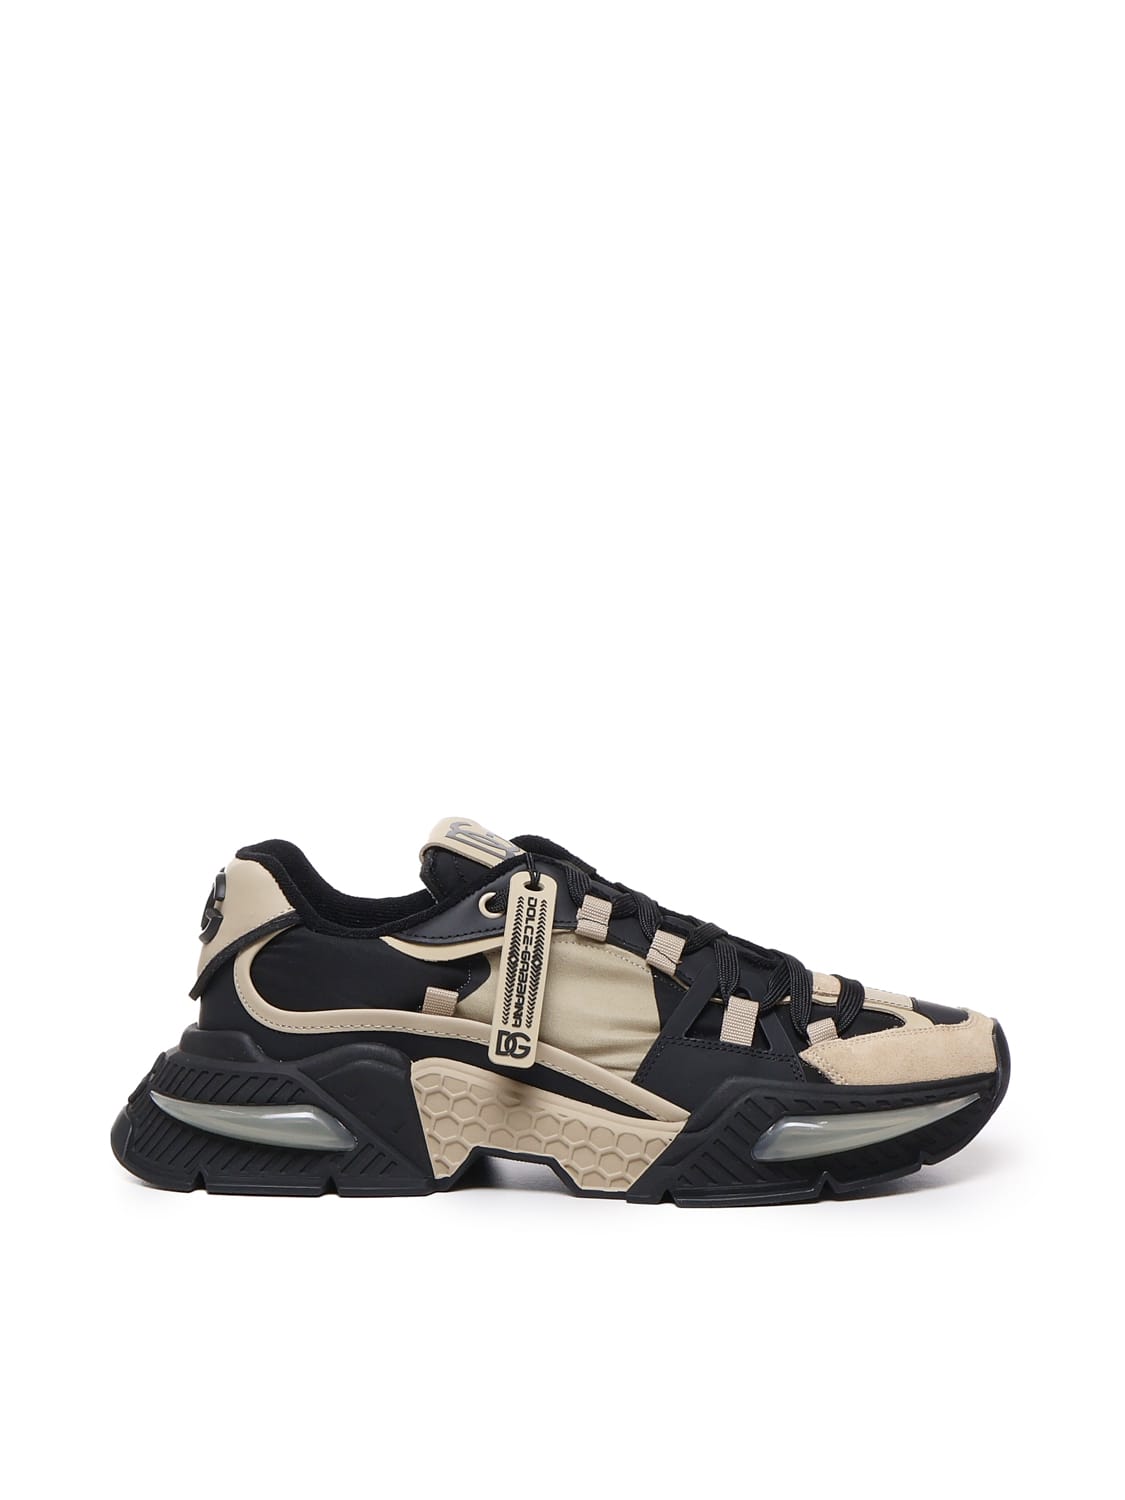 DOLCE & GABBANA AIRMASTER SNEAKER IN NYLON AND SUEDE